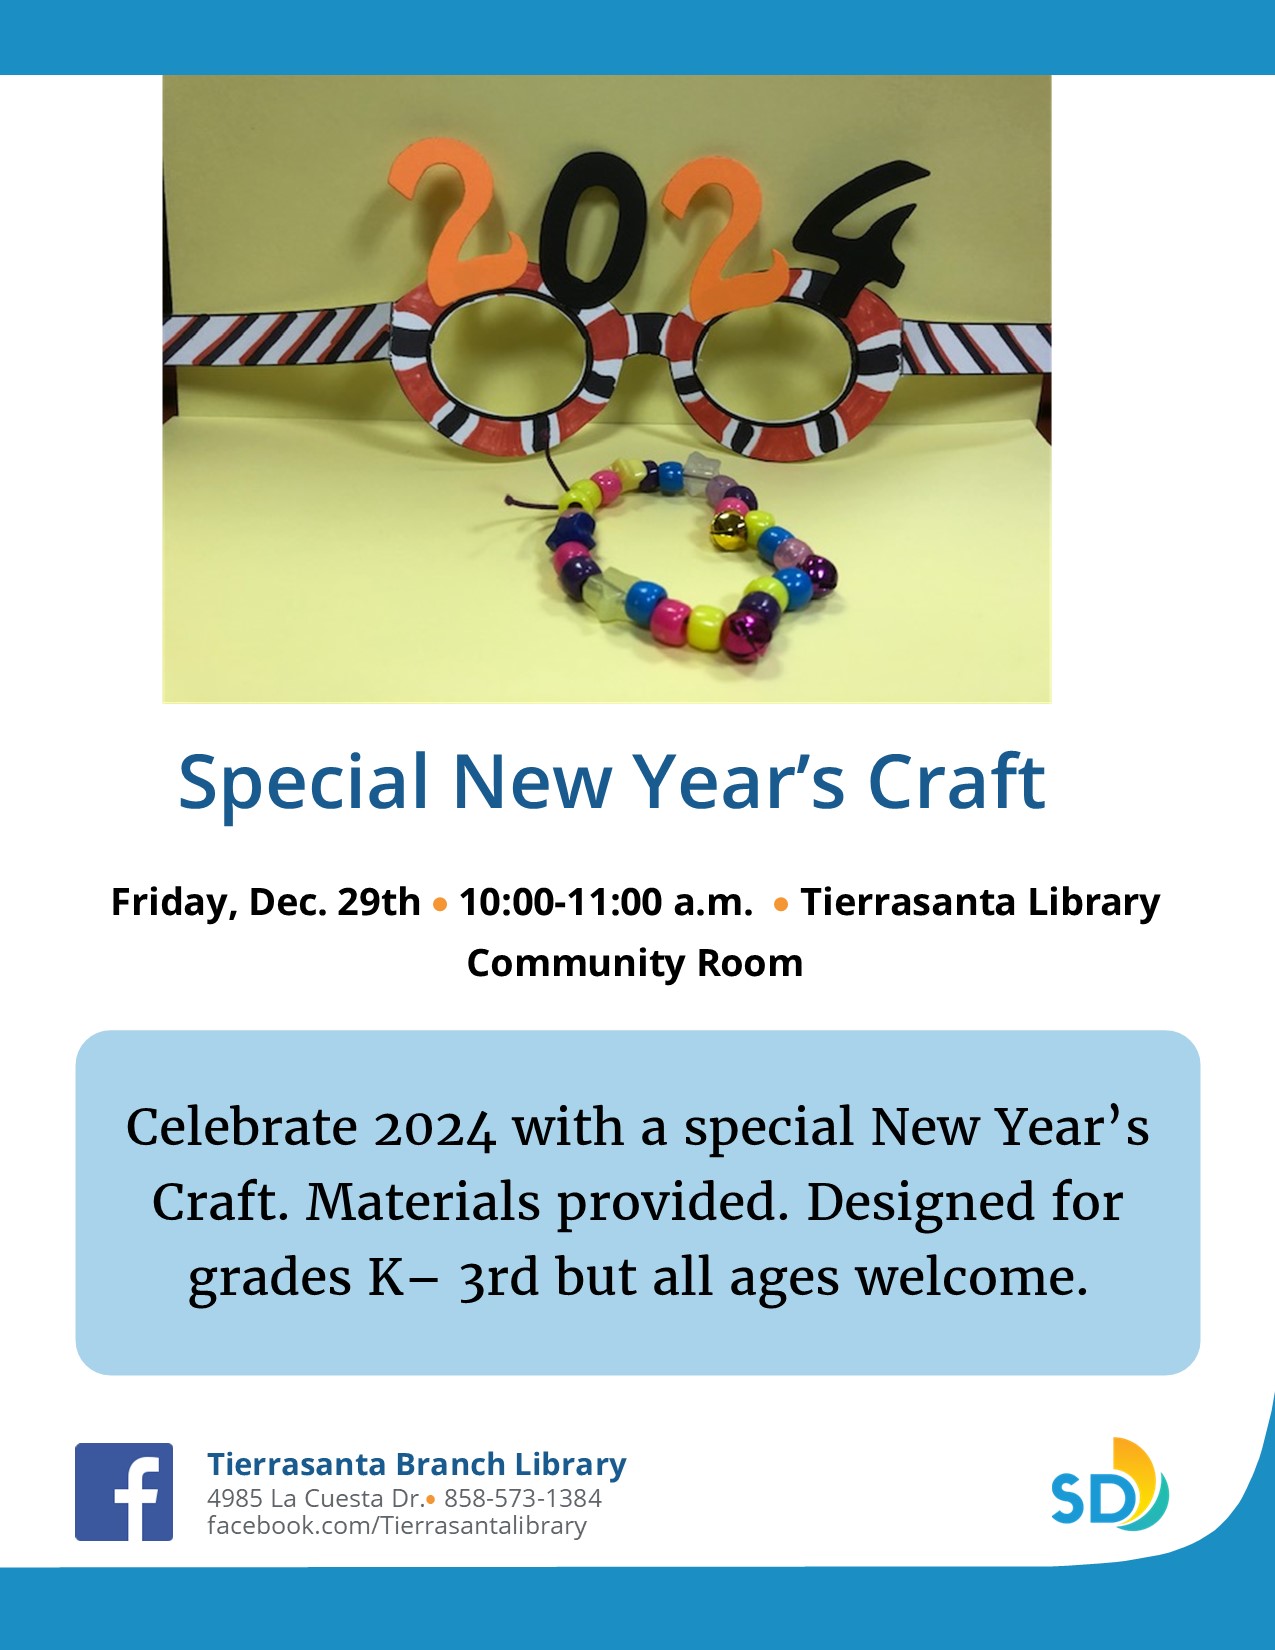 Flyer with a pair of 2024 glasses and a jingle bell bracelet